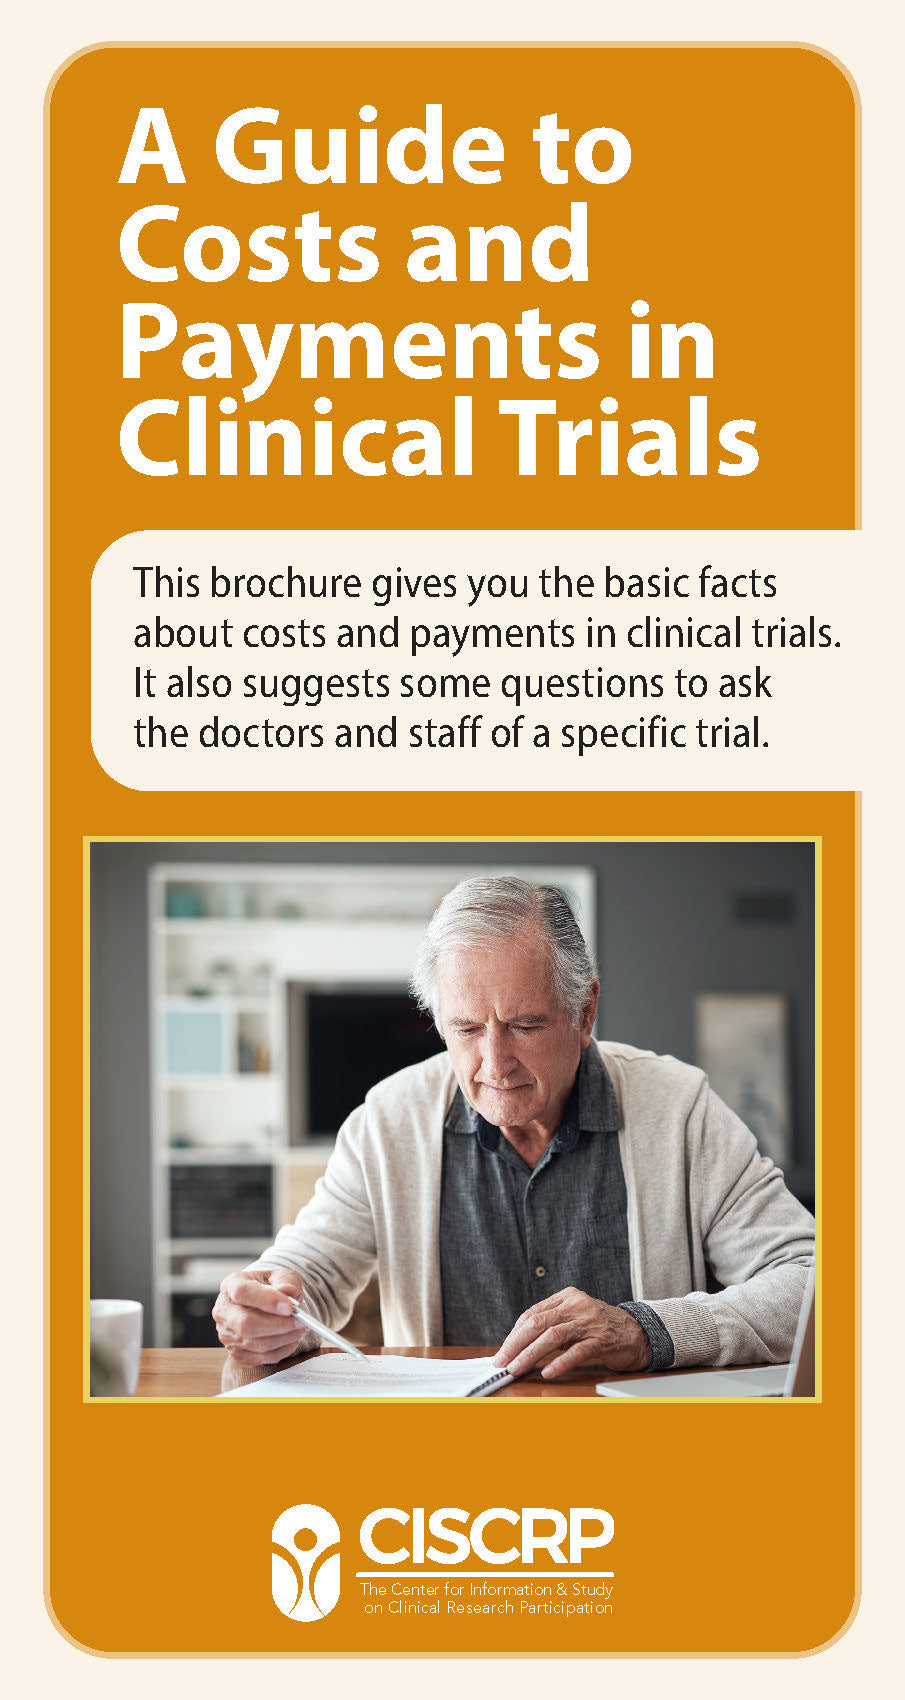 A Guide to Costs and Payments in Clinical Trials